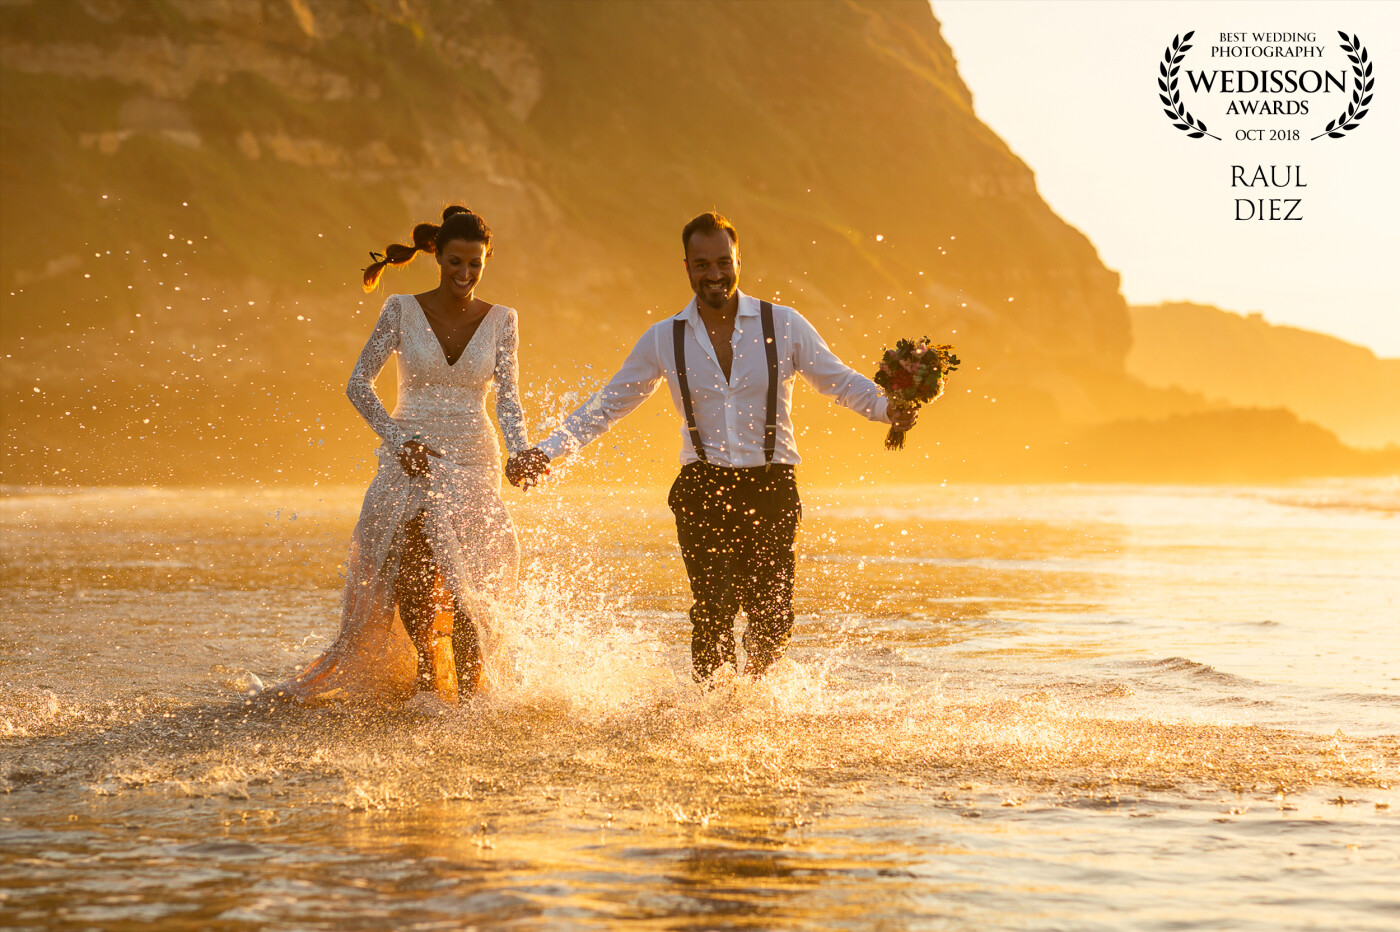 This photograph was taken at sunset in a postwedding in Suances (Cantabria) in northern Spain. I wanted to do a natural shooting and I told them to run on the water to look for the drops and the movement